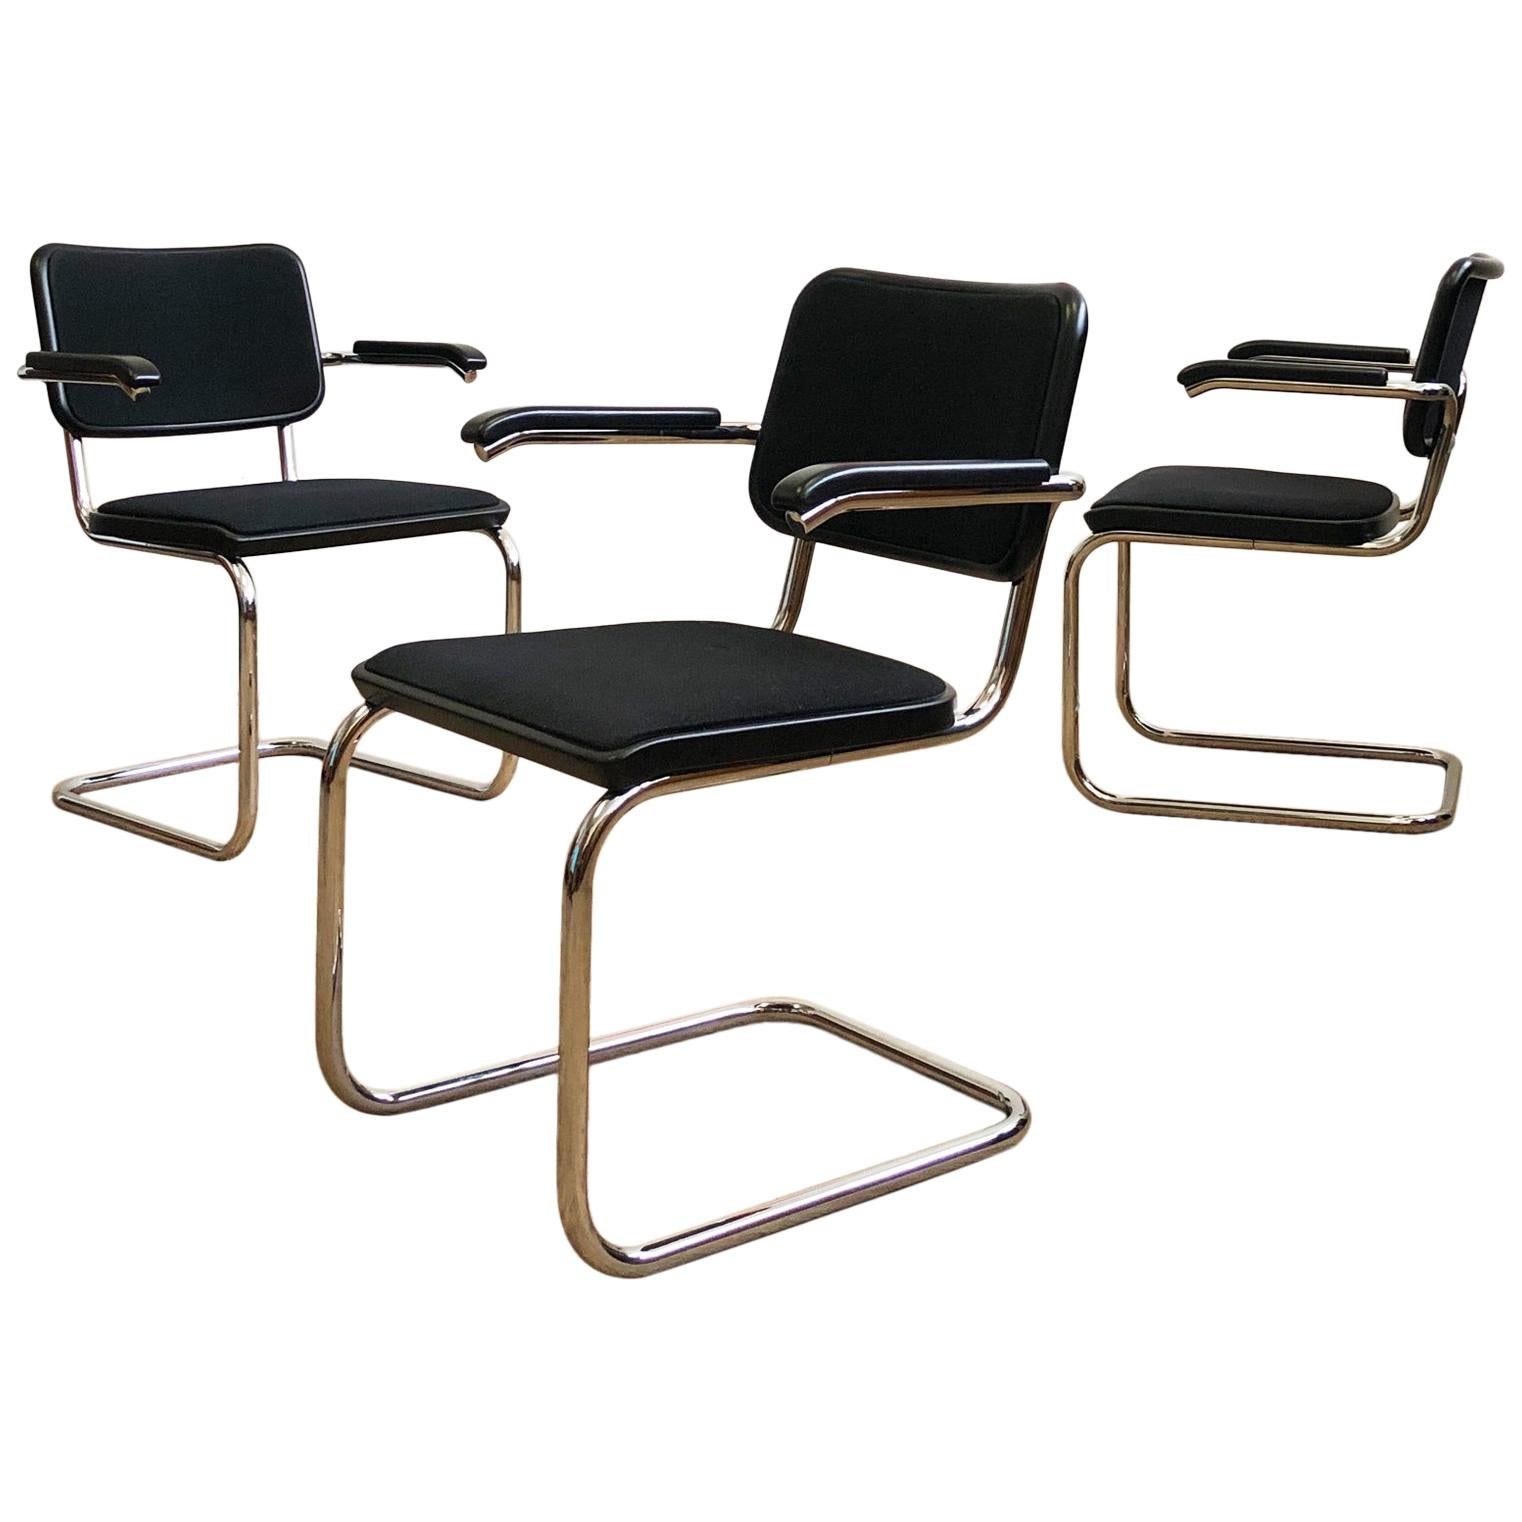 Thonet Cantilever Armchairs, Model S64 by Marcel Breuer, Black Fabric, Set of 4 For Sale